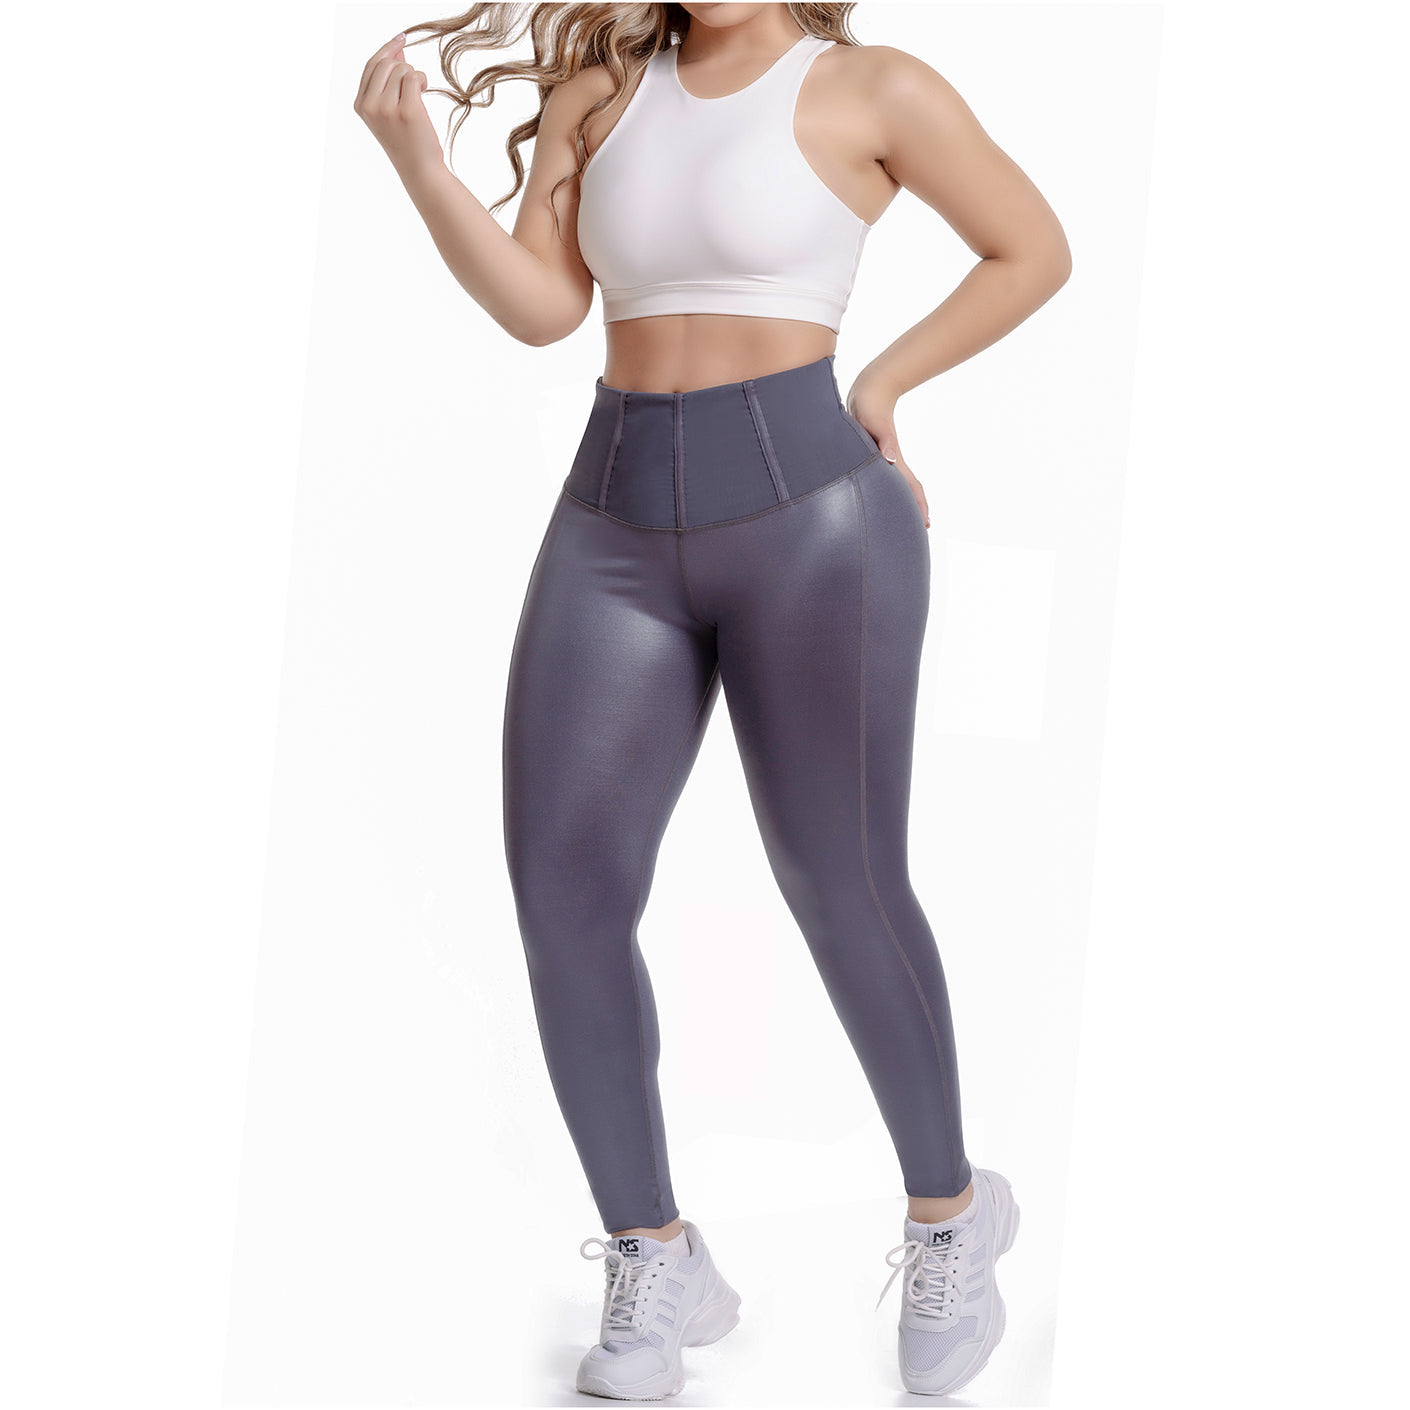 Our exotic Brazilian Lycra fitness and casual leggings. The seamed v-cut  leggings create an hourglass silhouette, enhanced by our extrem